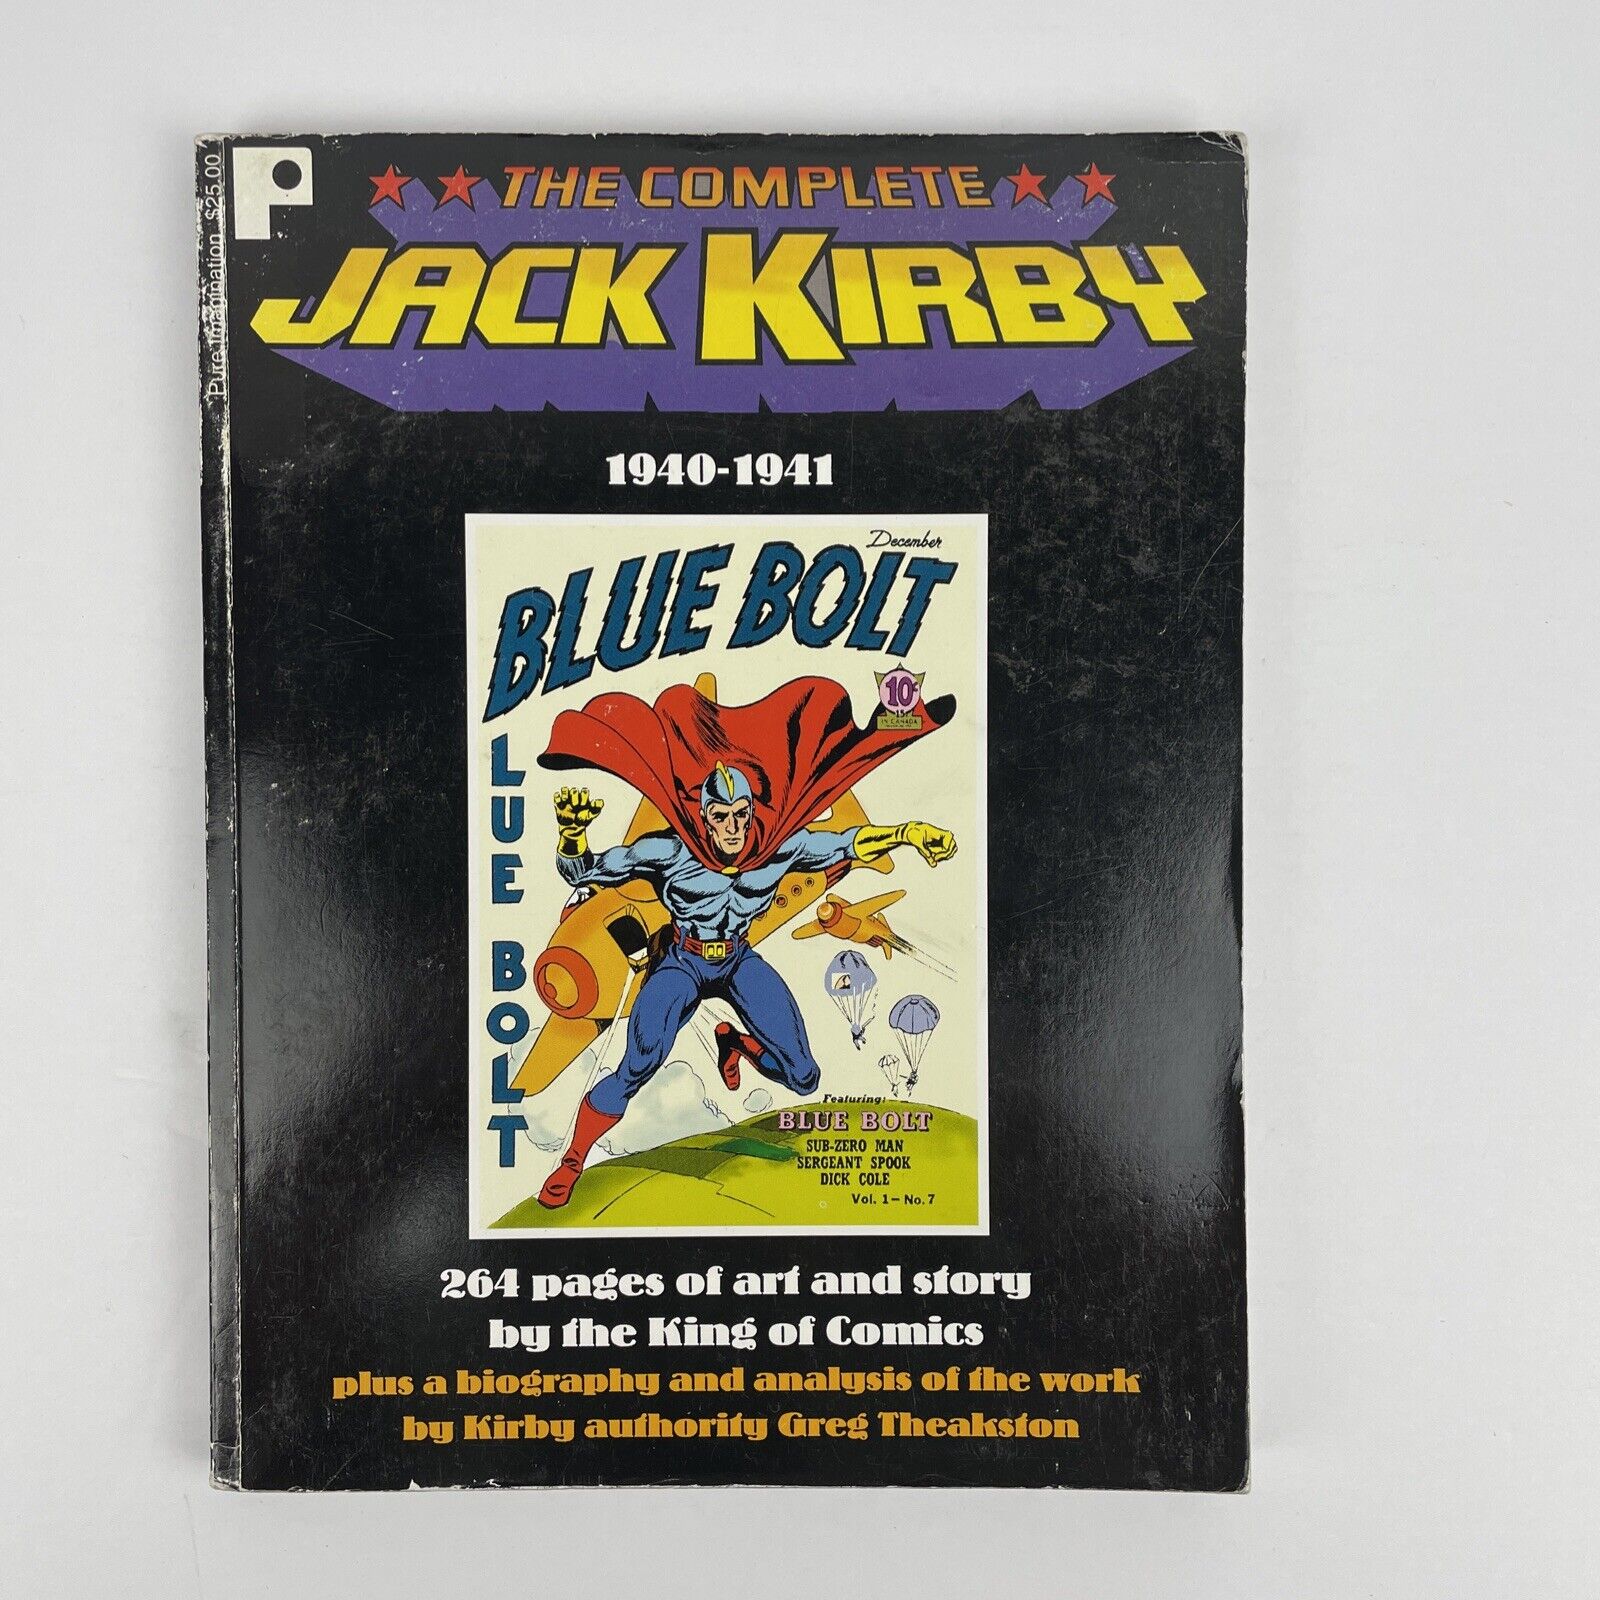 THE COMPLETE JACK KIRBY 1940-1941 (1997) Pure Imagination illustrated